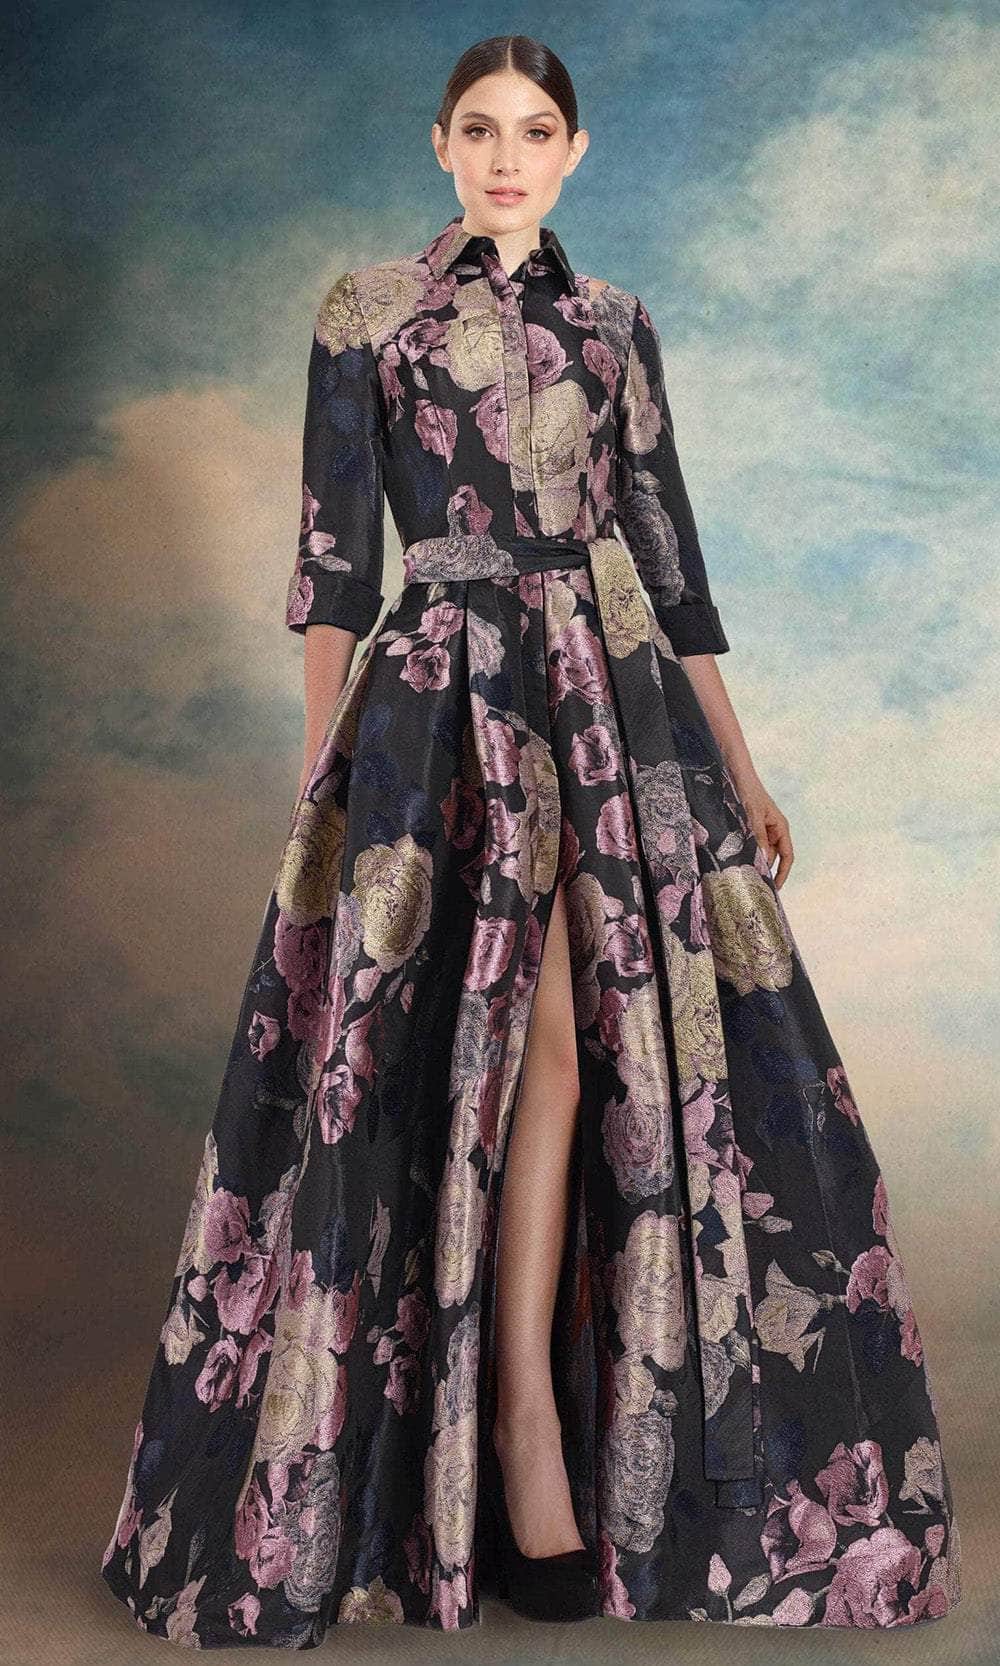 Janique 91321 - Floral Printed Collar Long Dress Mother of the Bride Dresses